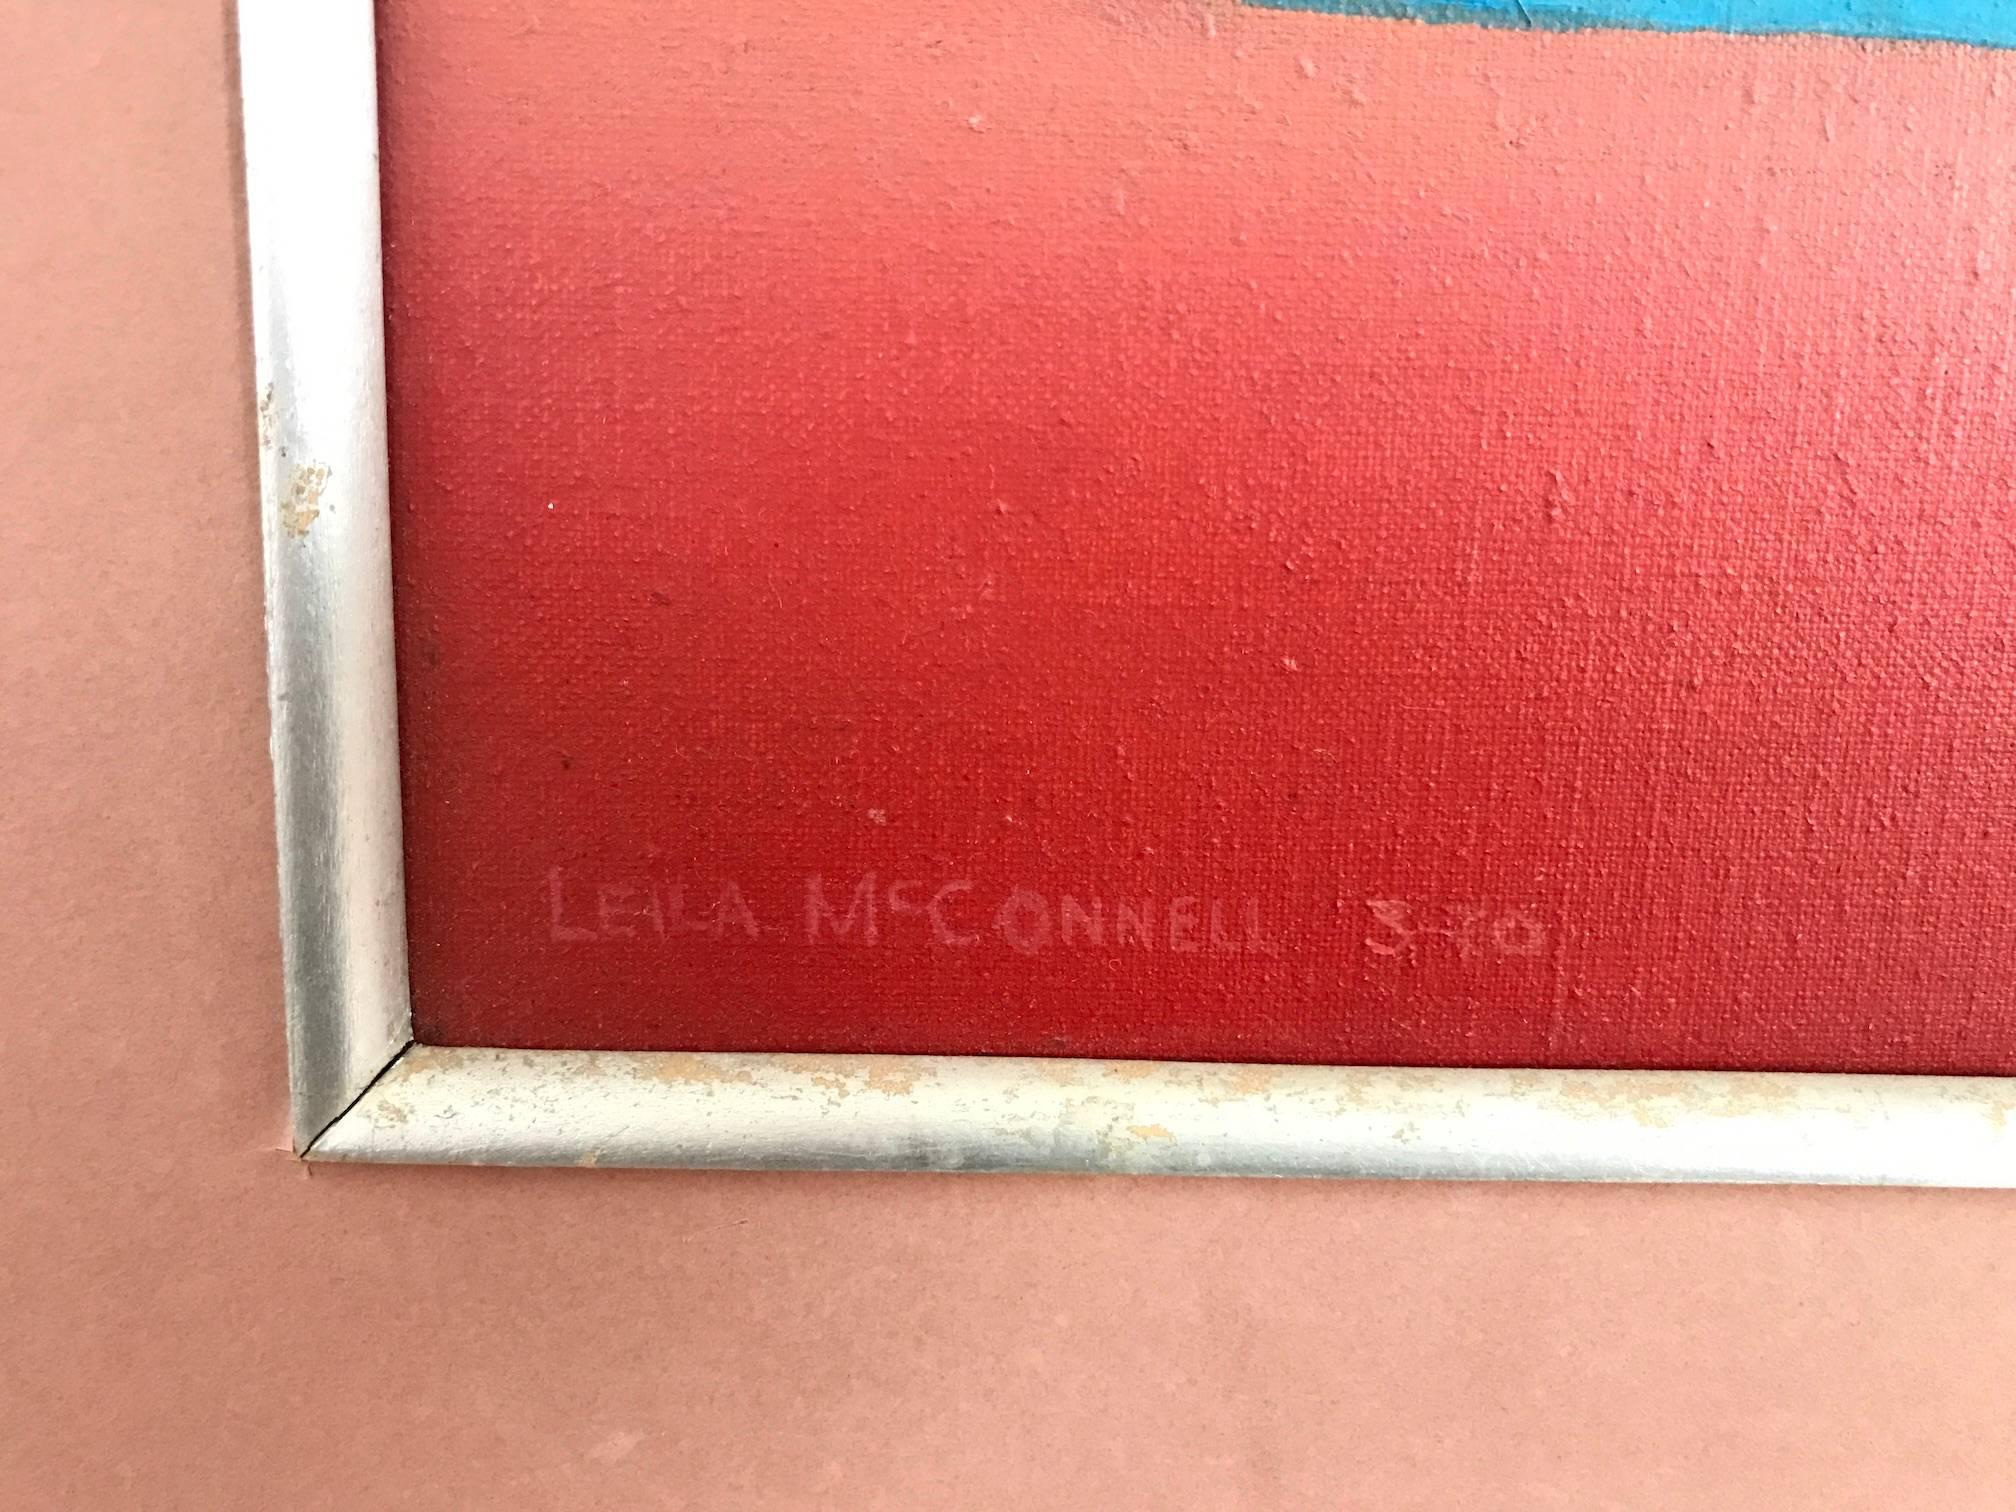 Leila McConnell- Abstract Red Painting 1